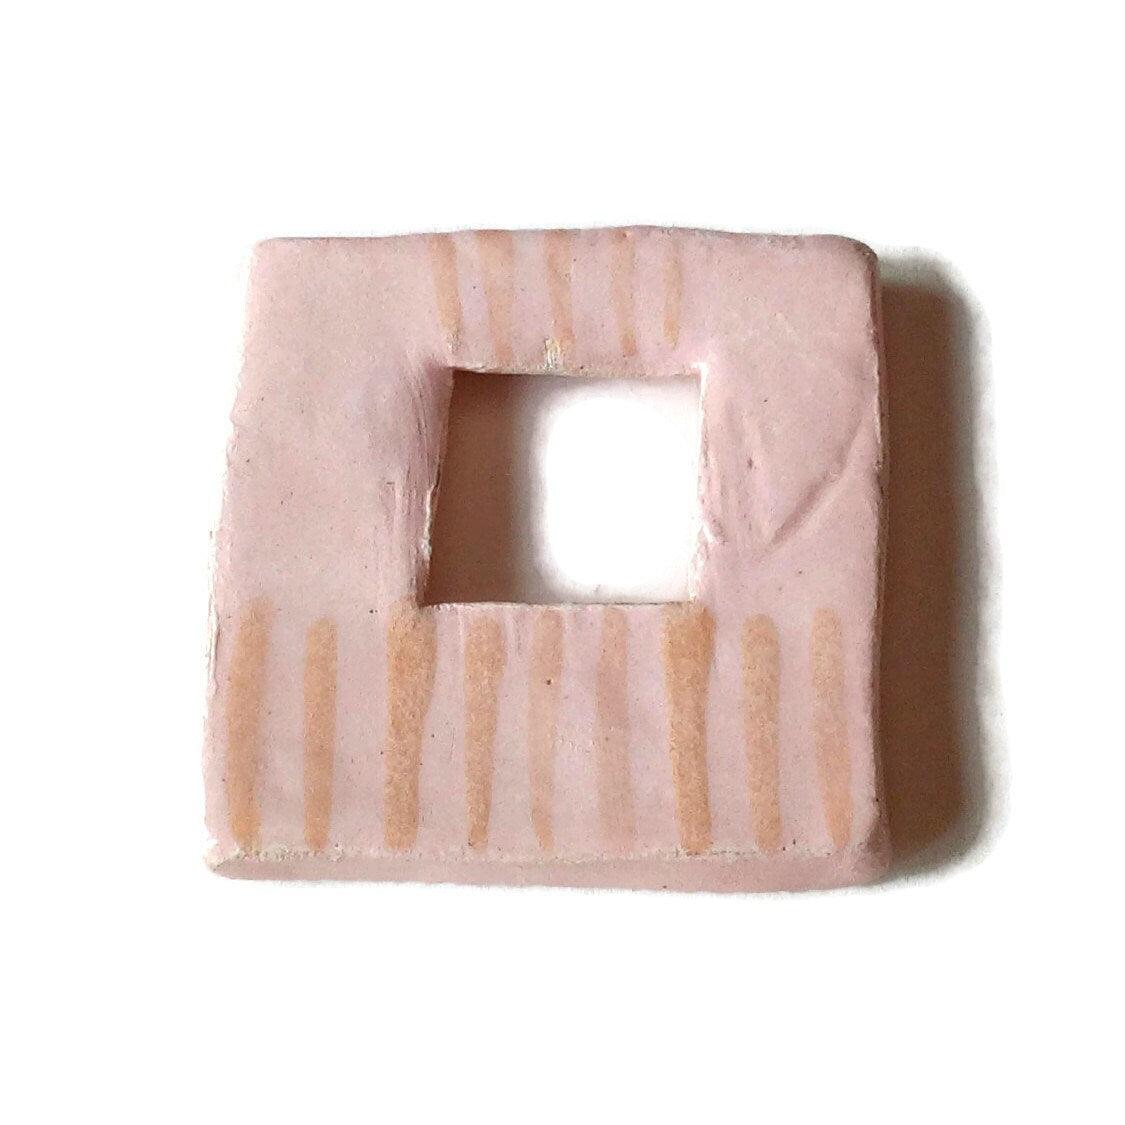 1Pc 50mm Extra Large Square Ceramic Necklace Pendant For Jewelry Making, Handmade Beige Clay Charms, Unique Statement Jewelry Components - Ceramica Ana Rafael